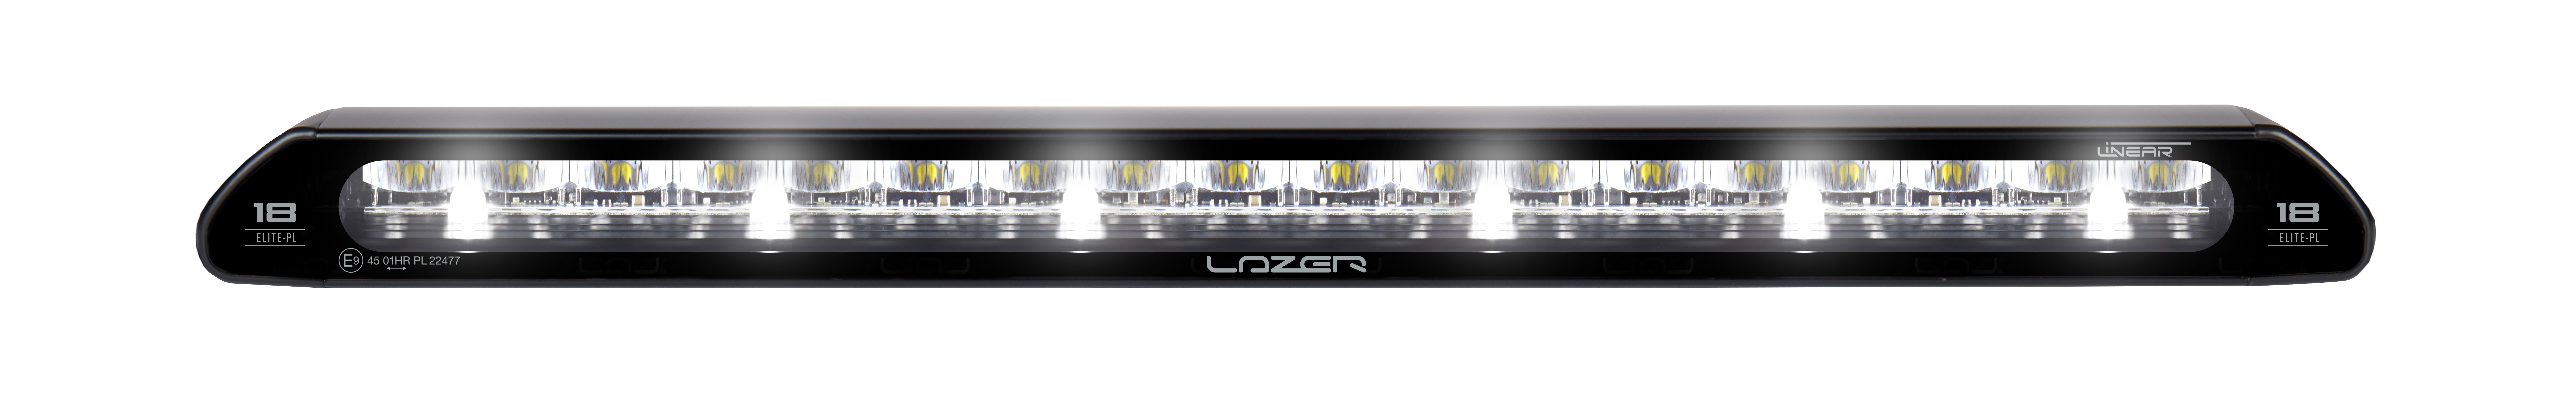 Sunvisor 30 cm for Scania NG With Lazer Linear 18 Elite 126W LED-bars with white pos.light